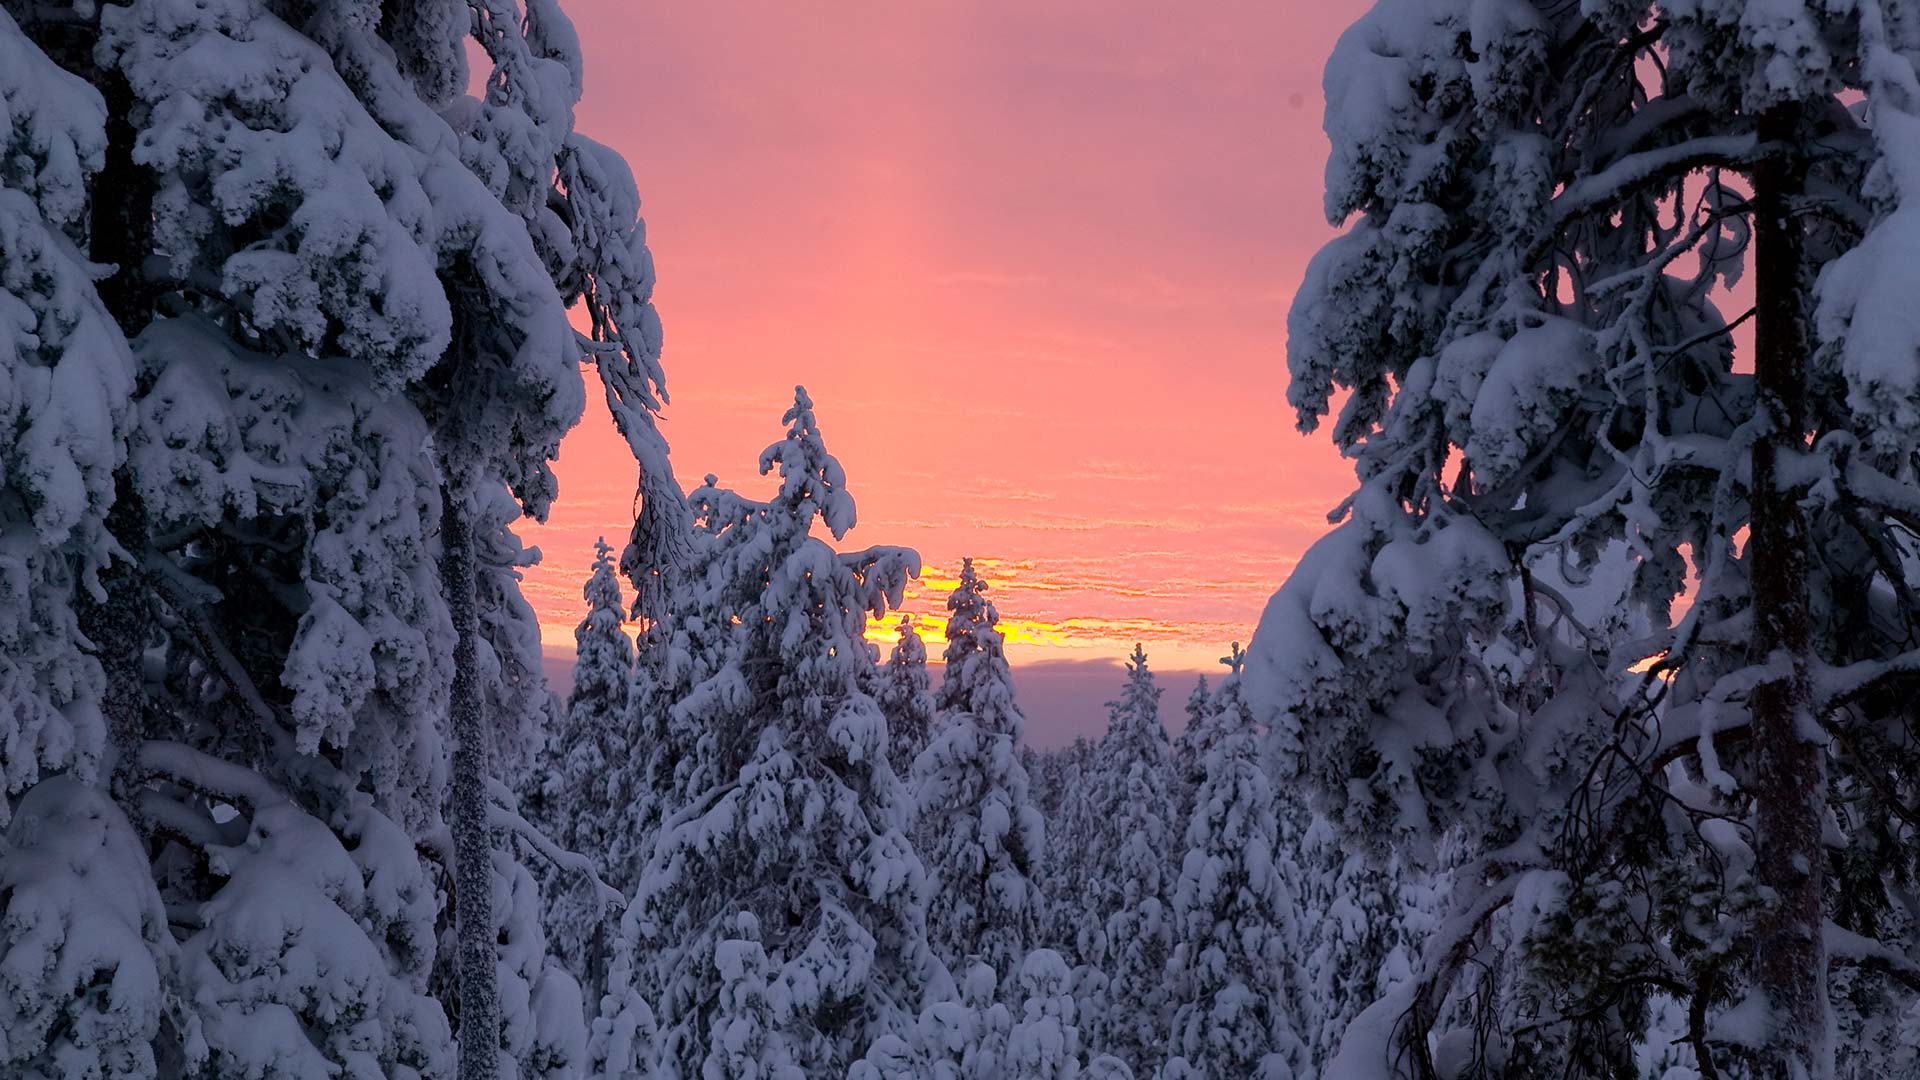 best places to visit in sweden during winter